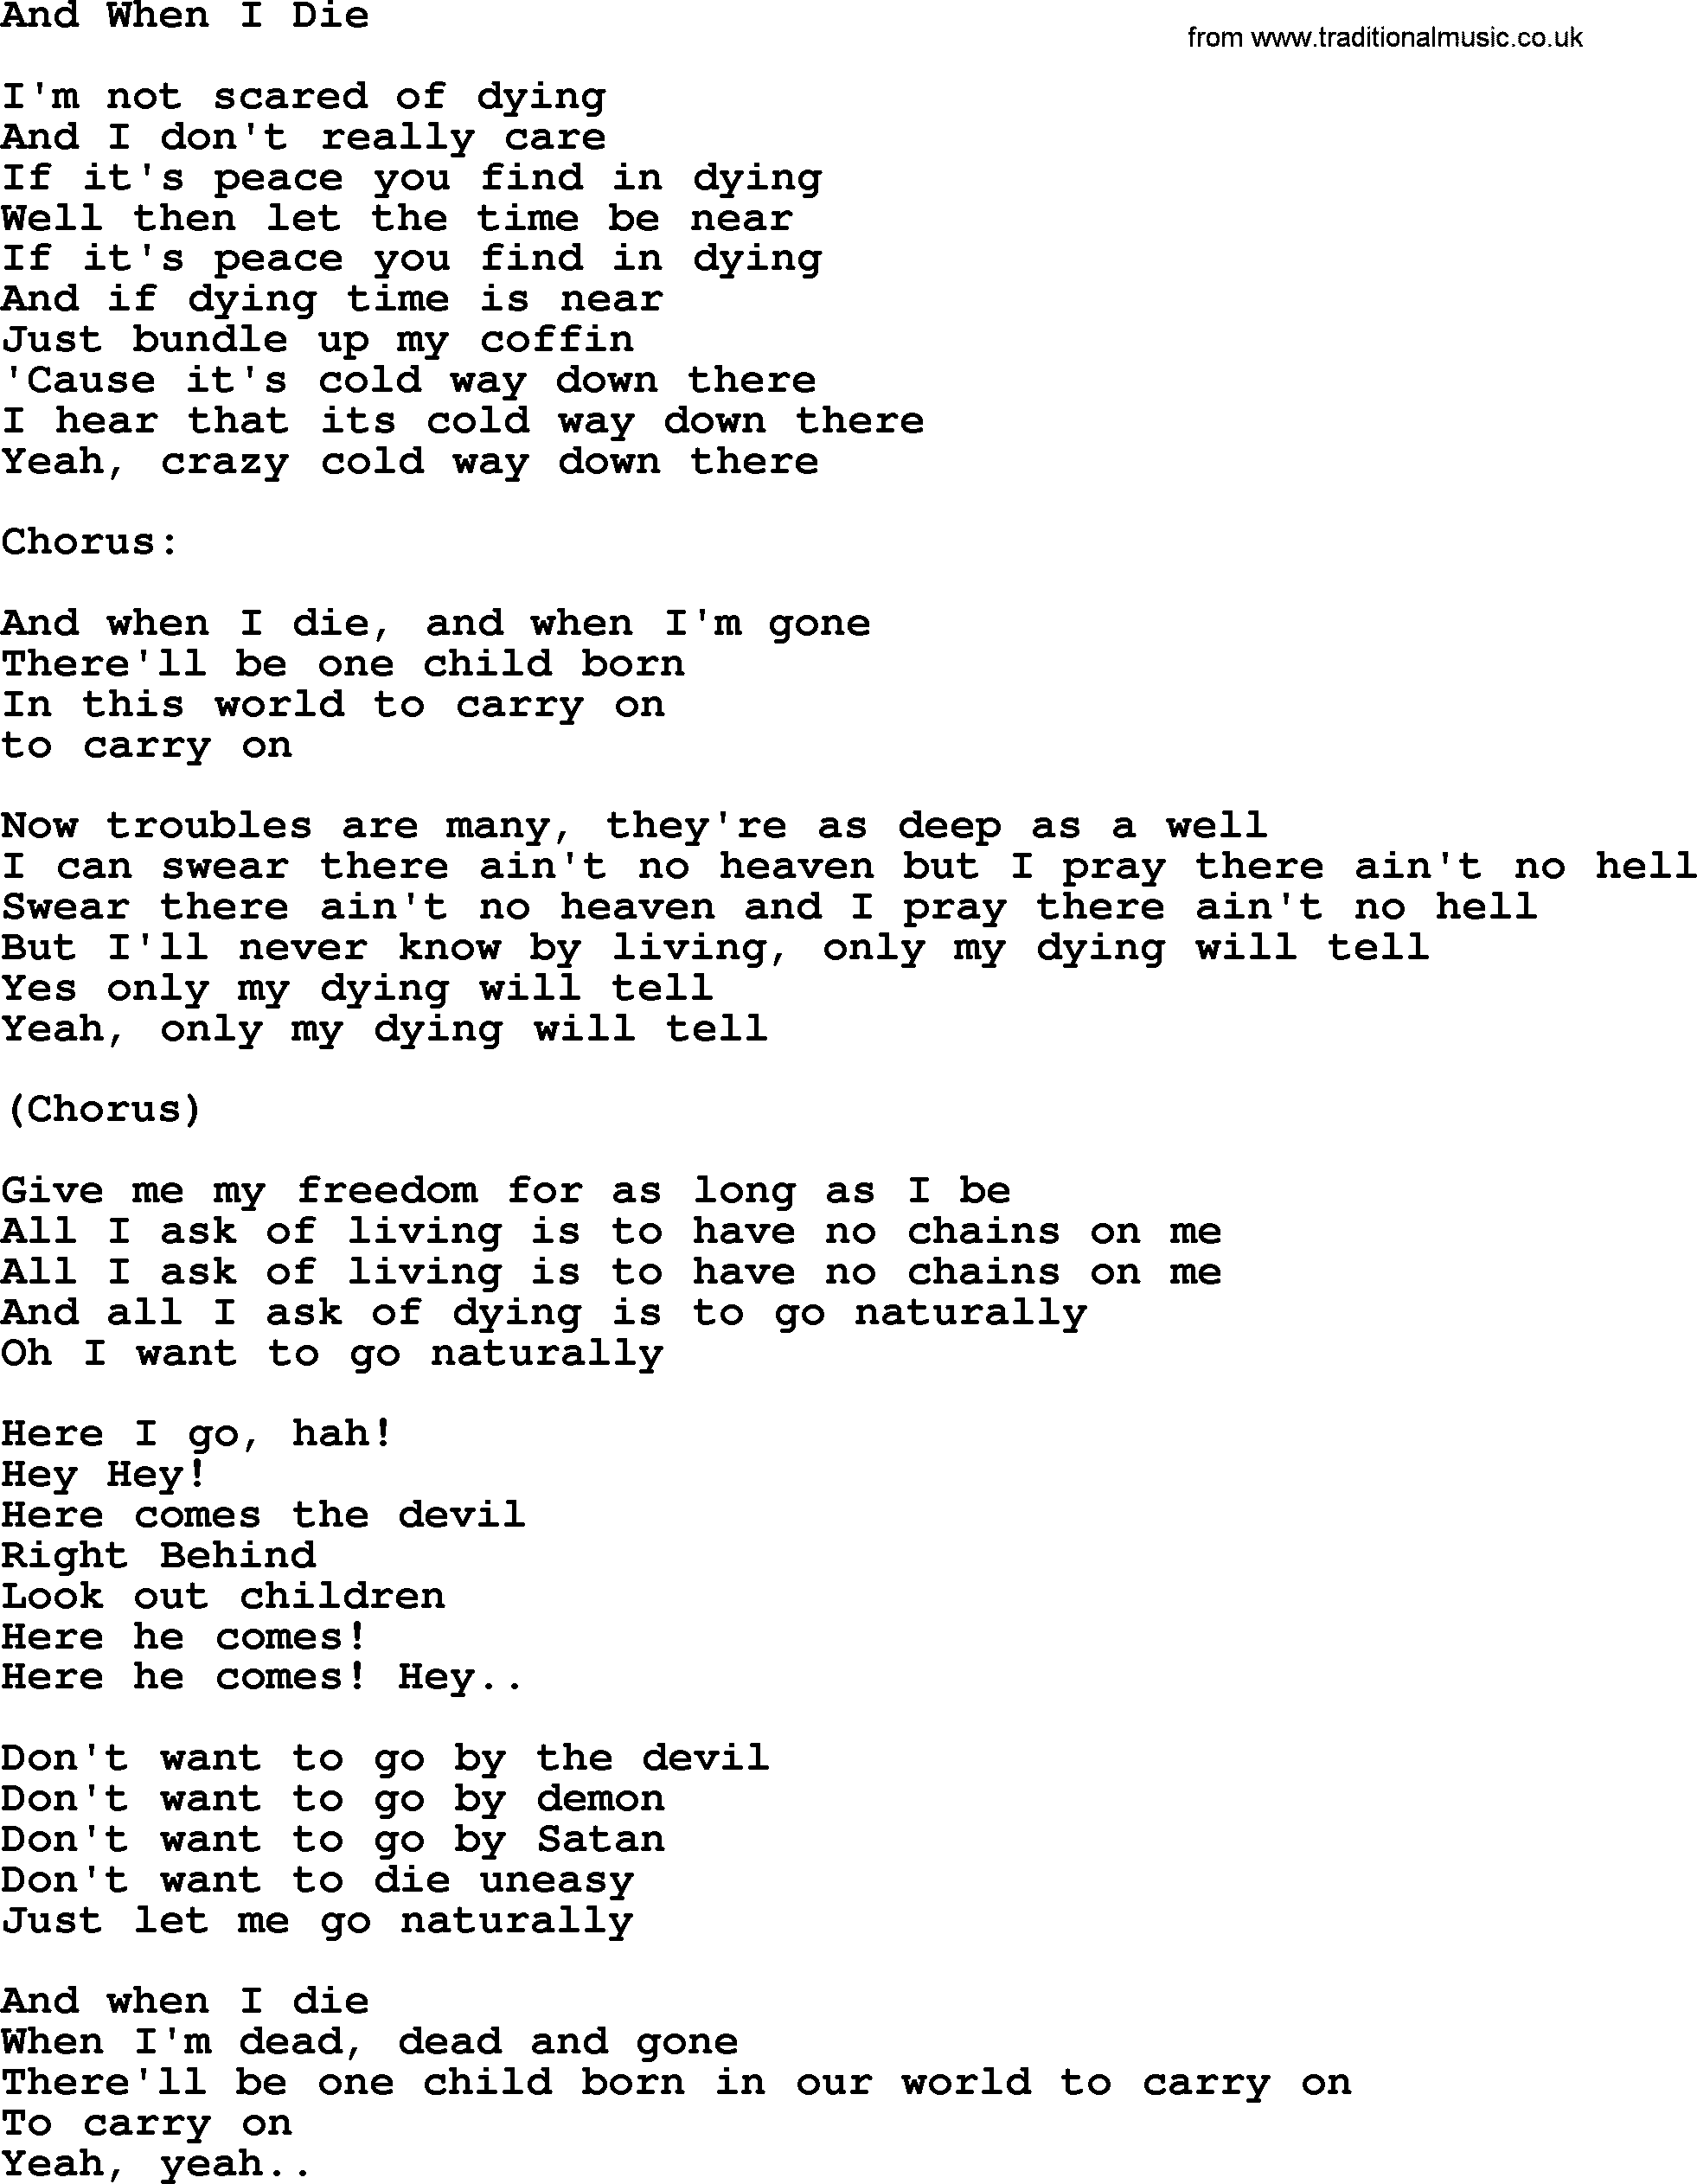 The Byrds song And When I Die, lyrics